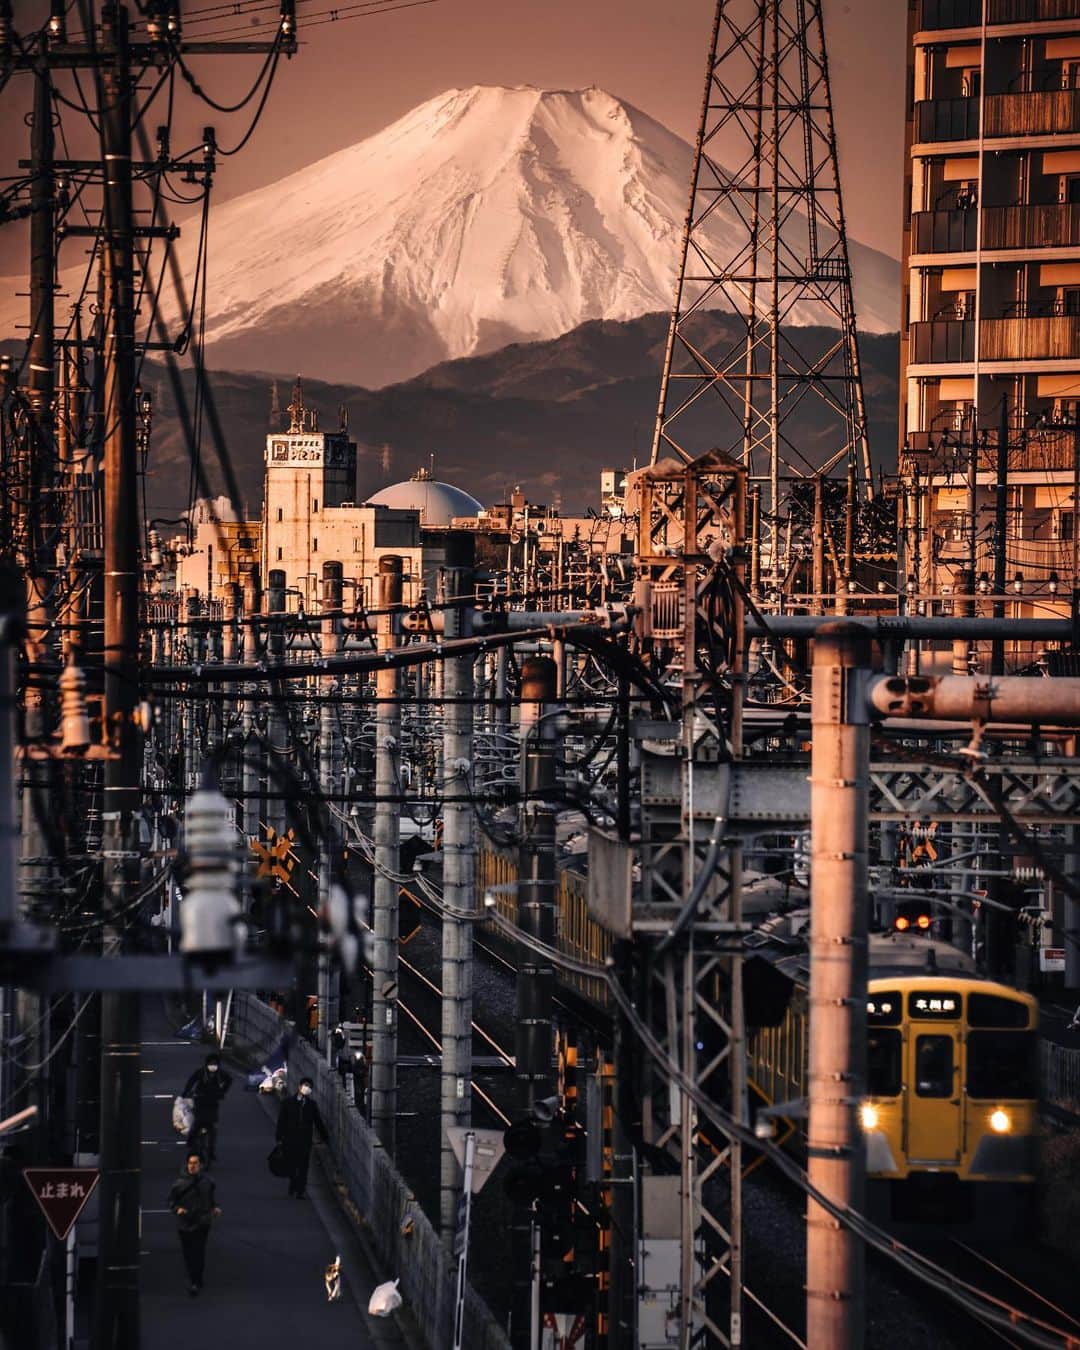 R̸K̸のインスタグラム：「The sun goes down with a small sunset and the orange color shines Mt. Fuji and the town. In Japan, there is a chime that rings in the town at 5 o'clock every day. Let's go home. #hellofrom Saitama, Japan ・ ・ ・ ・ #beautifuldestinations #earthfocus #earthoffcial #earthpix #thegreatplanet #discoverearth #fantastic_earth #awesome_earthpix #roamtheplanet #ourplanetdaily  #theglobewanderer #visualambassadors #stayandwander #welivetoexplore #awesome_photographers #IamATraveler #wonderful_places  #designboom #voyaged #sonyalpha #bealpha #aroundtheworldpix #artofvisuals  #cnntravel #complexphotos #d_signers #lonelyplanet #luxuryworldtraveler#bbctravel @sonyalpha  @lightroom @soul.planet @earthfever @9gag @500px @paradise @mega_mansions @natgeotravel @awesome.earth」